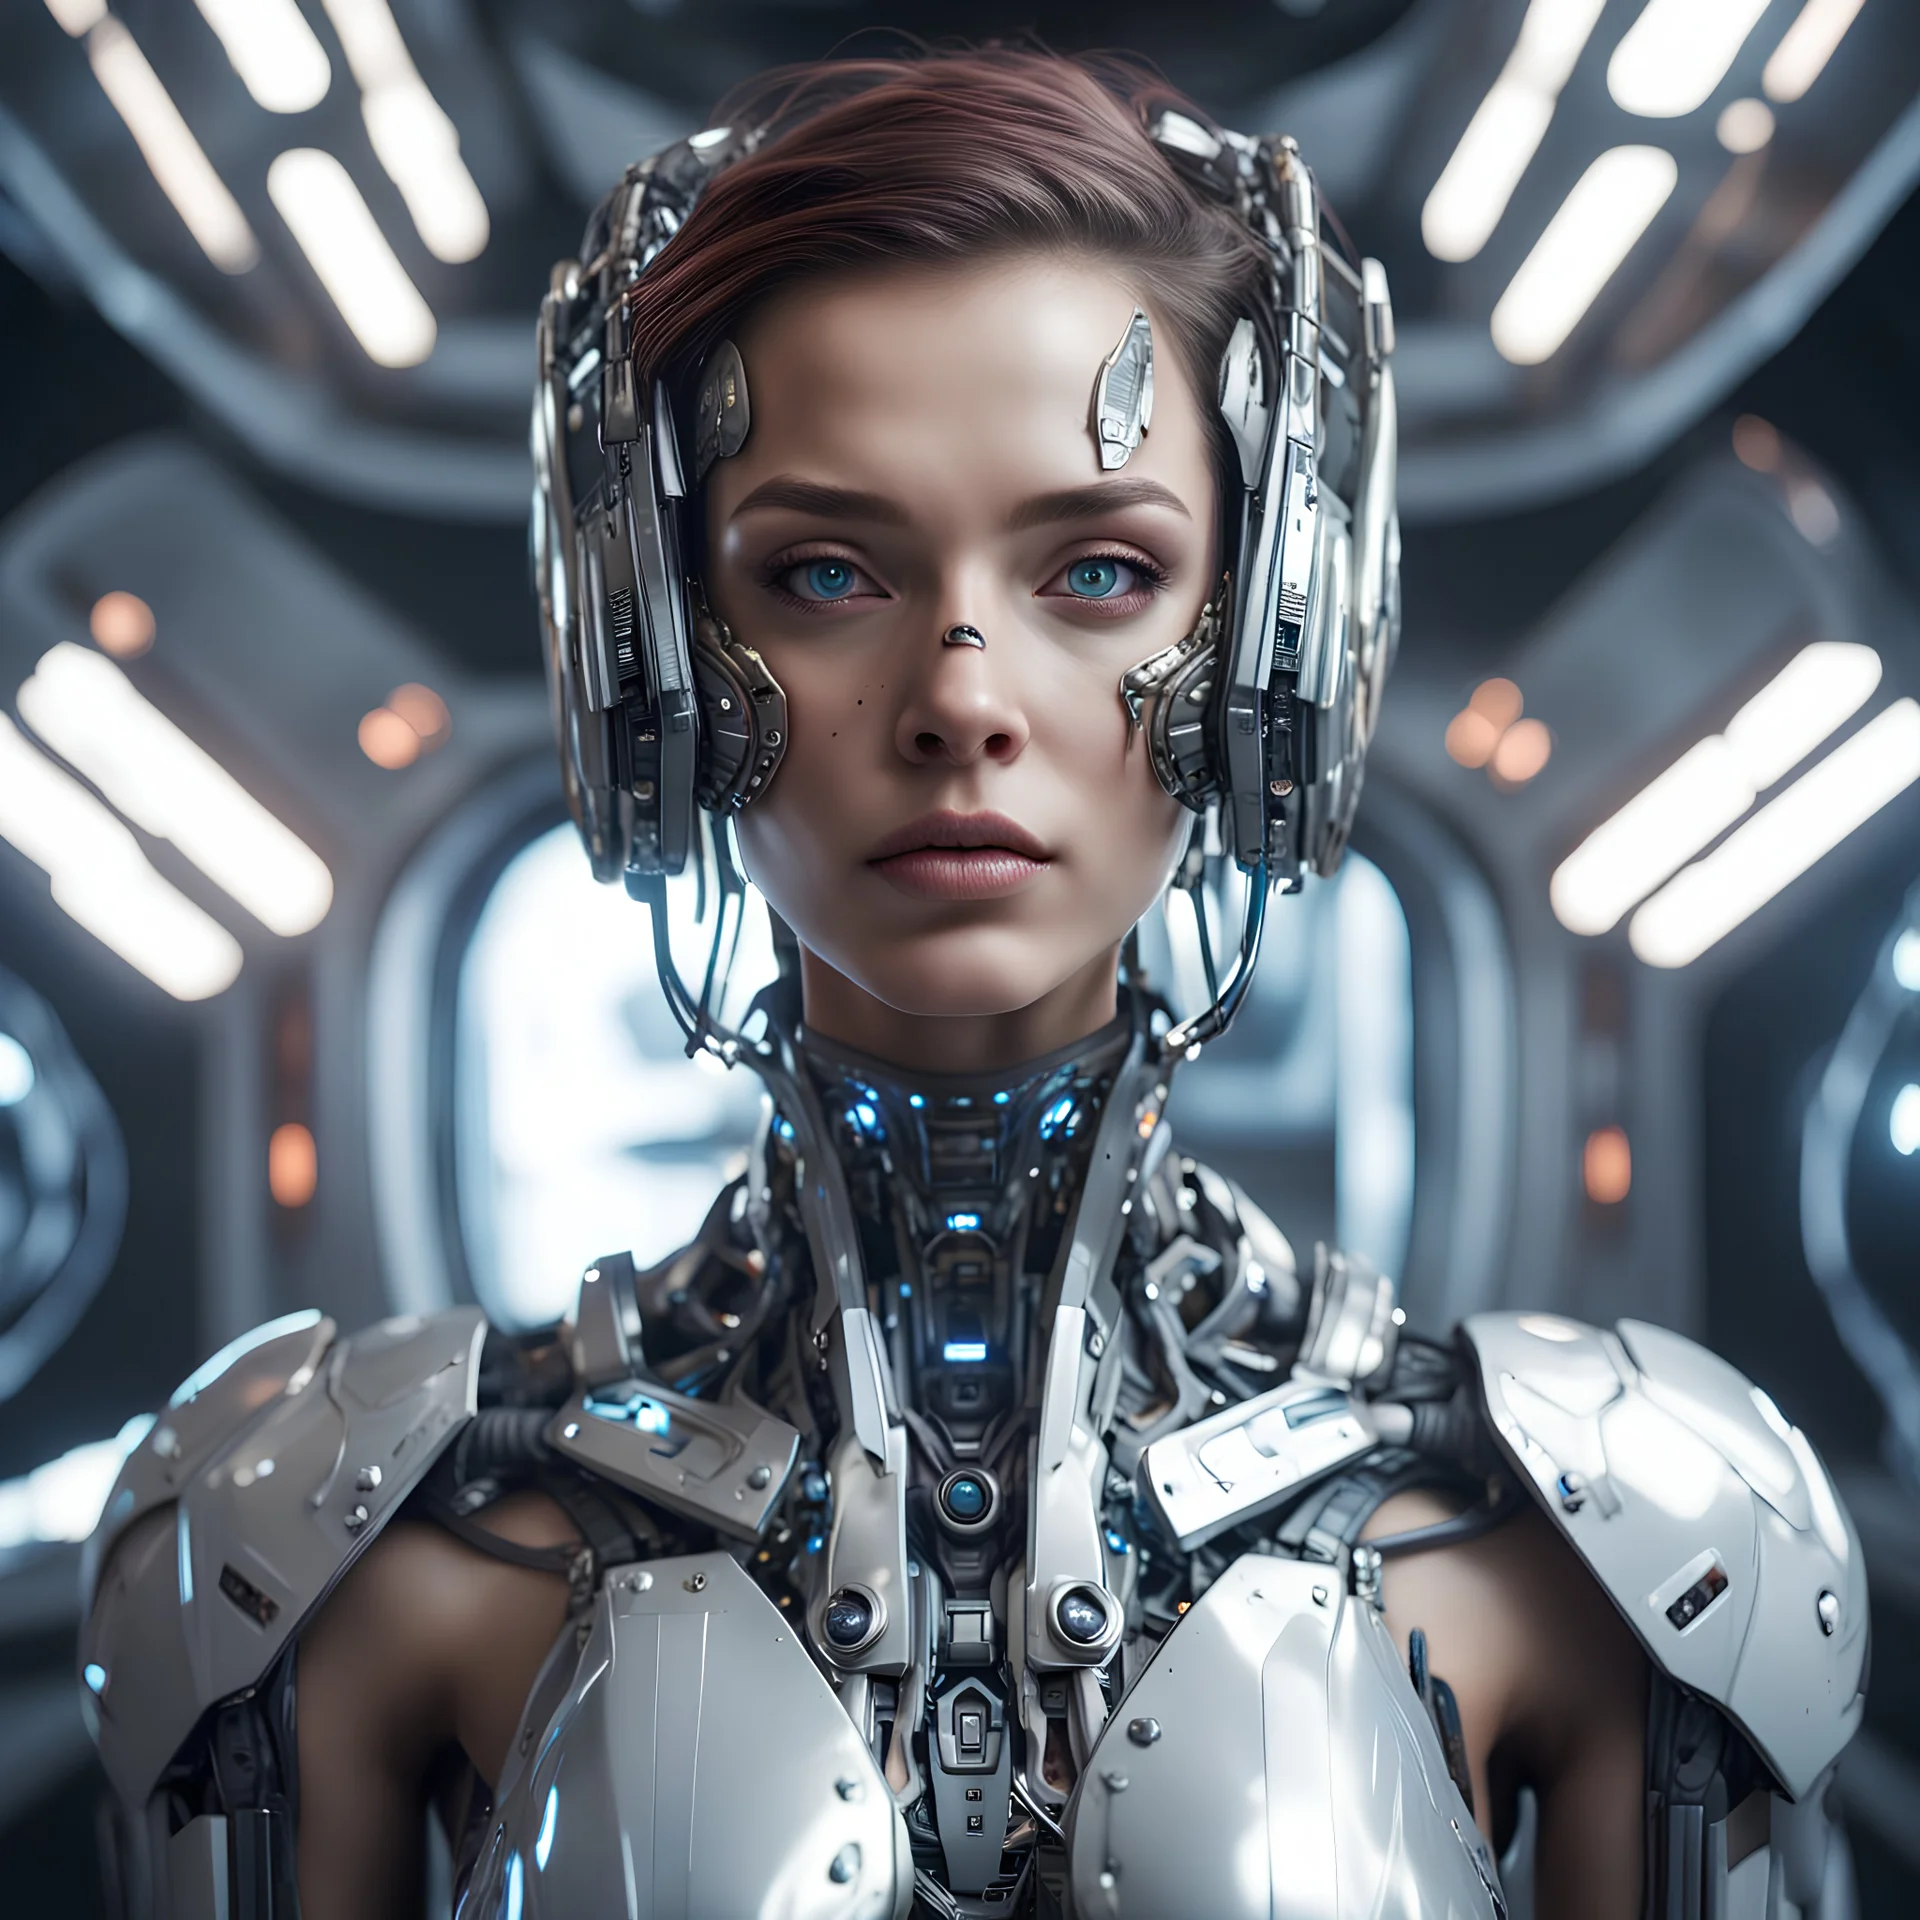 Futuristic cyborg girl with metal face a